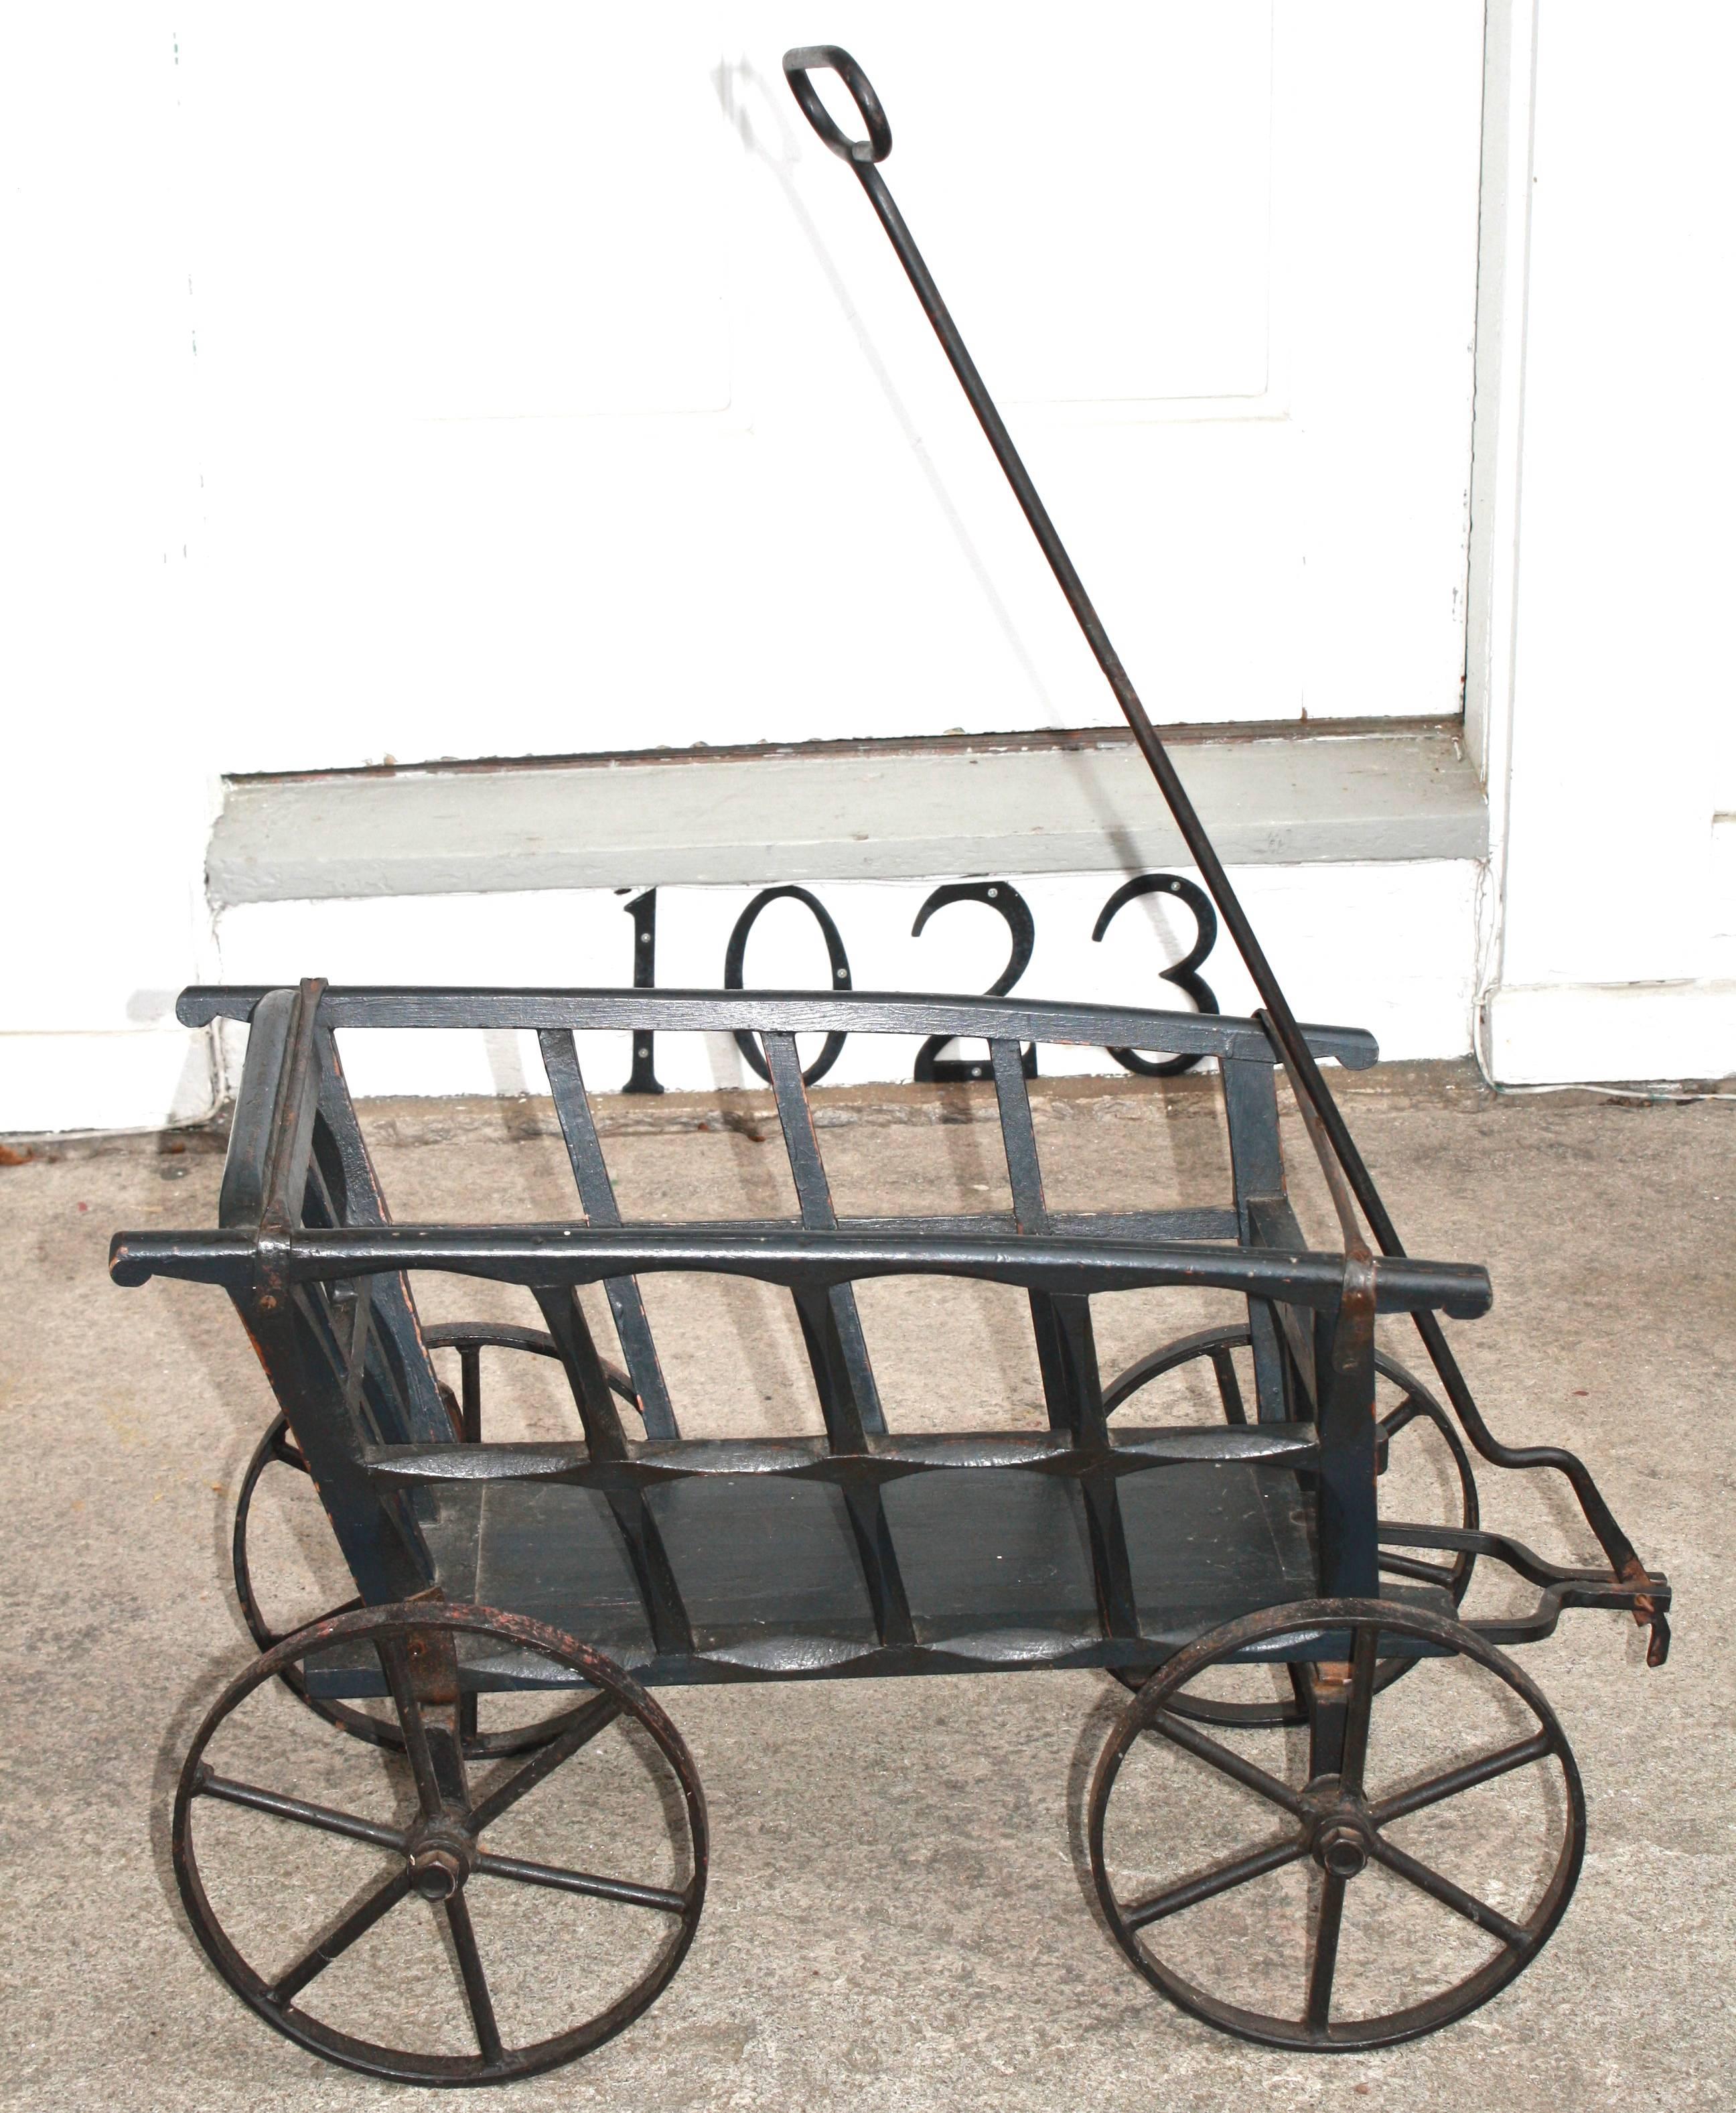 In the style of Gilded Age gardening paraphernalia at country houses in the late 19th and early 20th centuries, a small decorative utility wagon for gathering and transporting cuttings from a flower garden. From an 'East End' Long Island